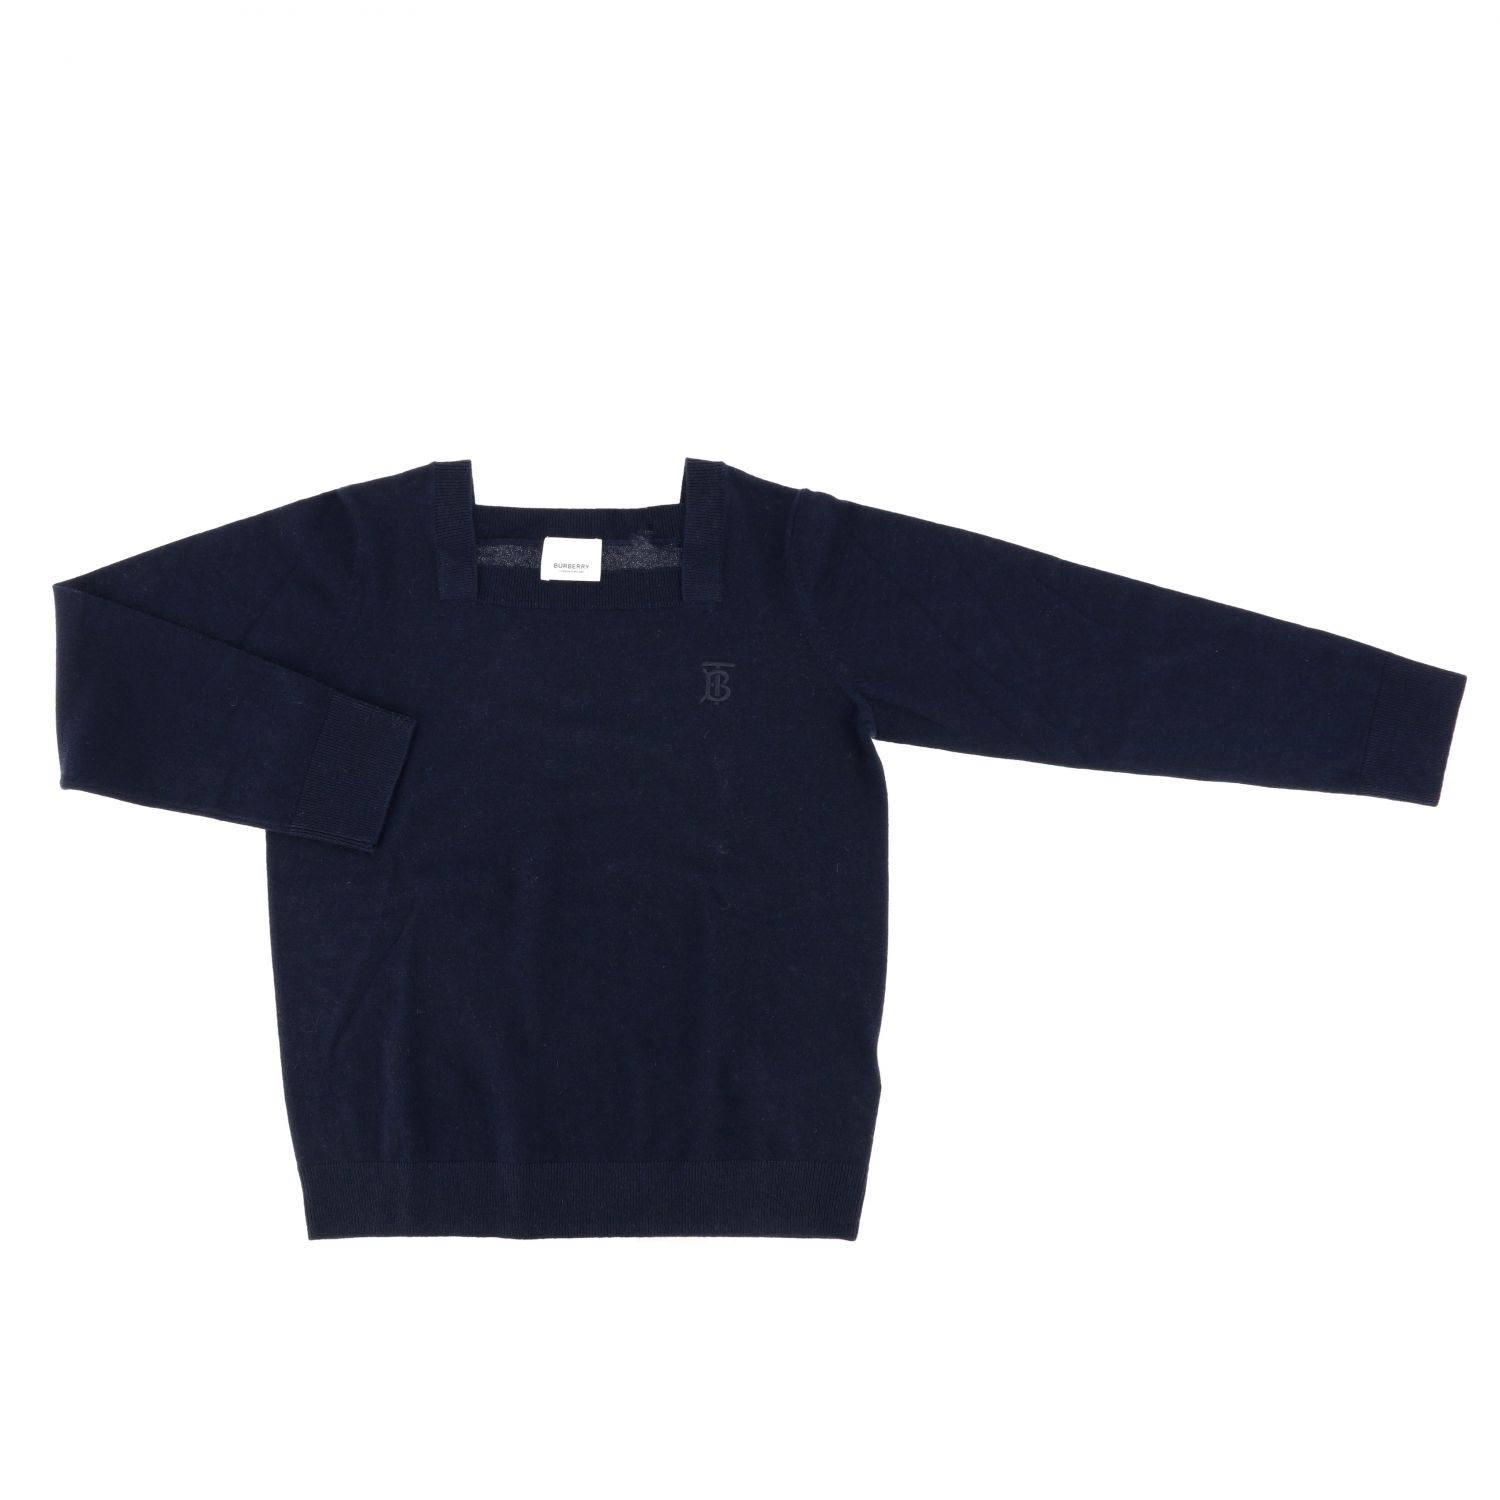 Burberry Outlet: Sweater kids - Navy | Sweater Burberry 8017854 GIGLIO.COM